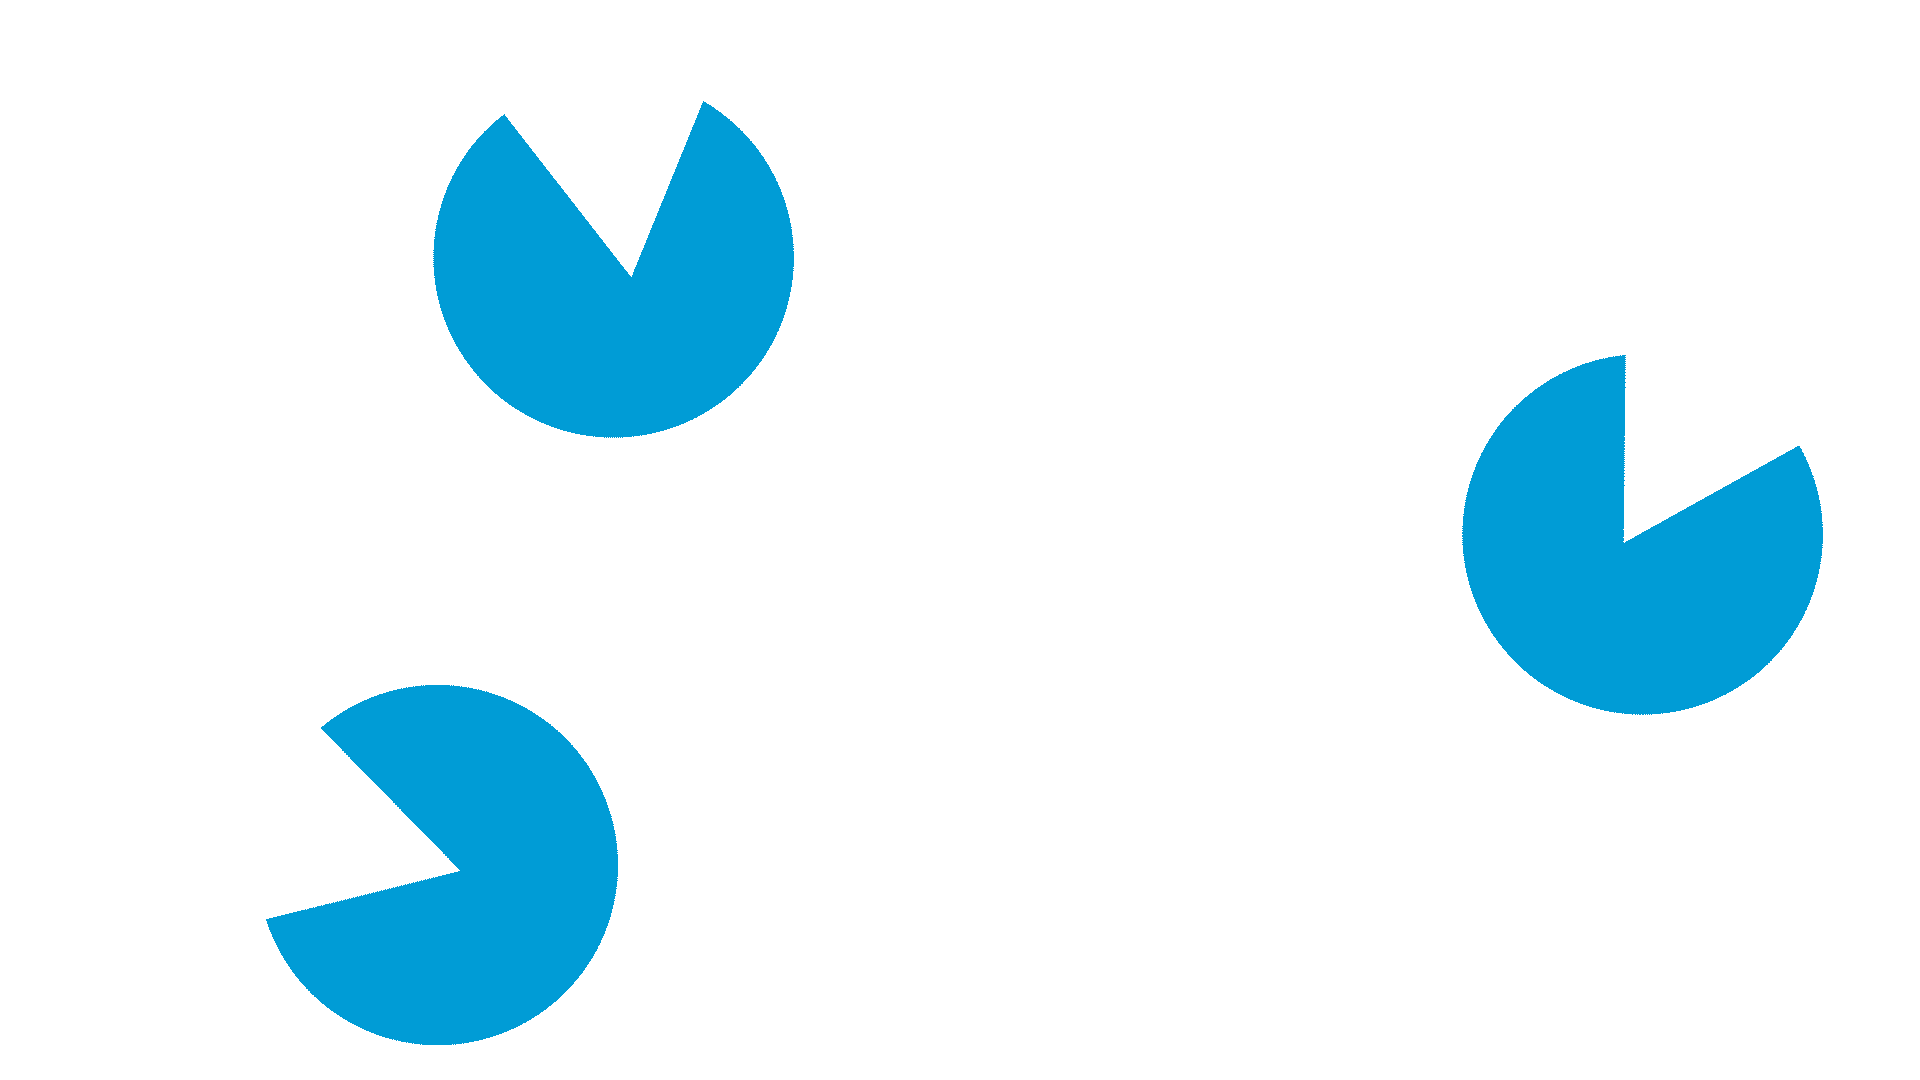 3 blue circles, each with a triangular white slice removed, rotate together so that the white slices line up to illustrate a white triangle within the blue circle as the animation progresses.